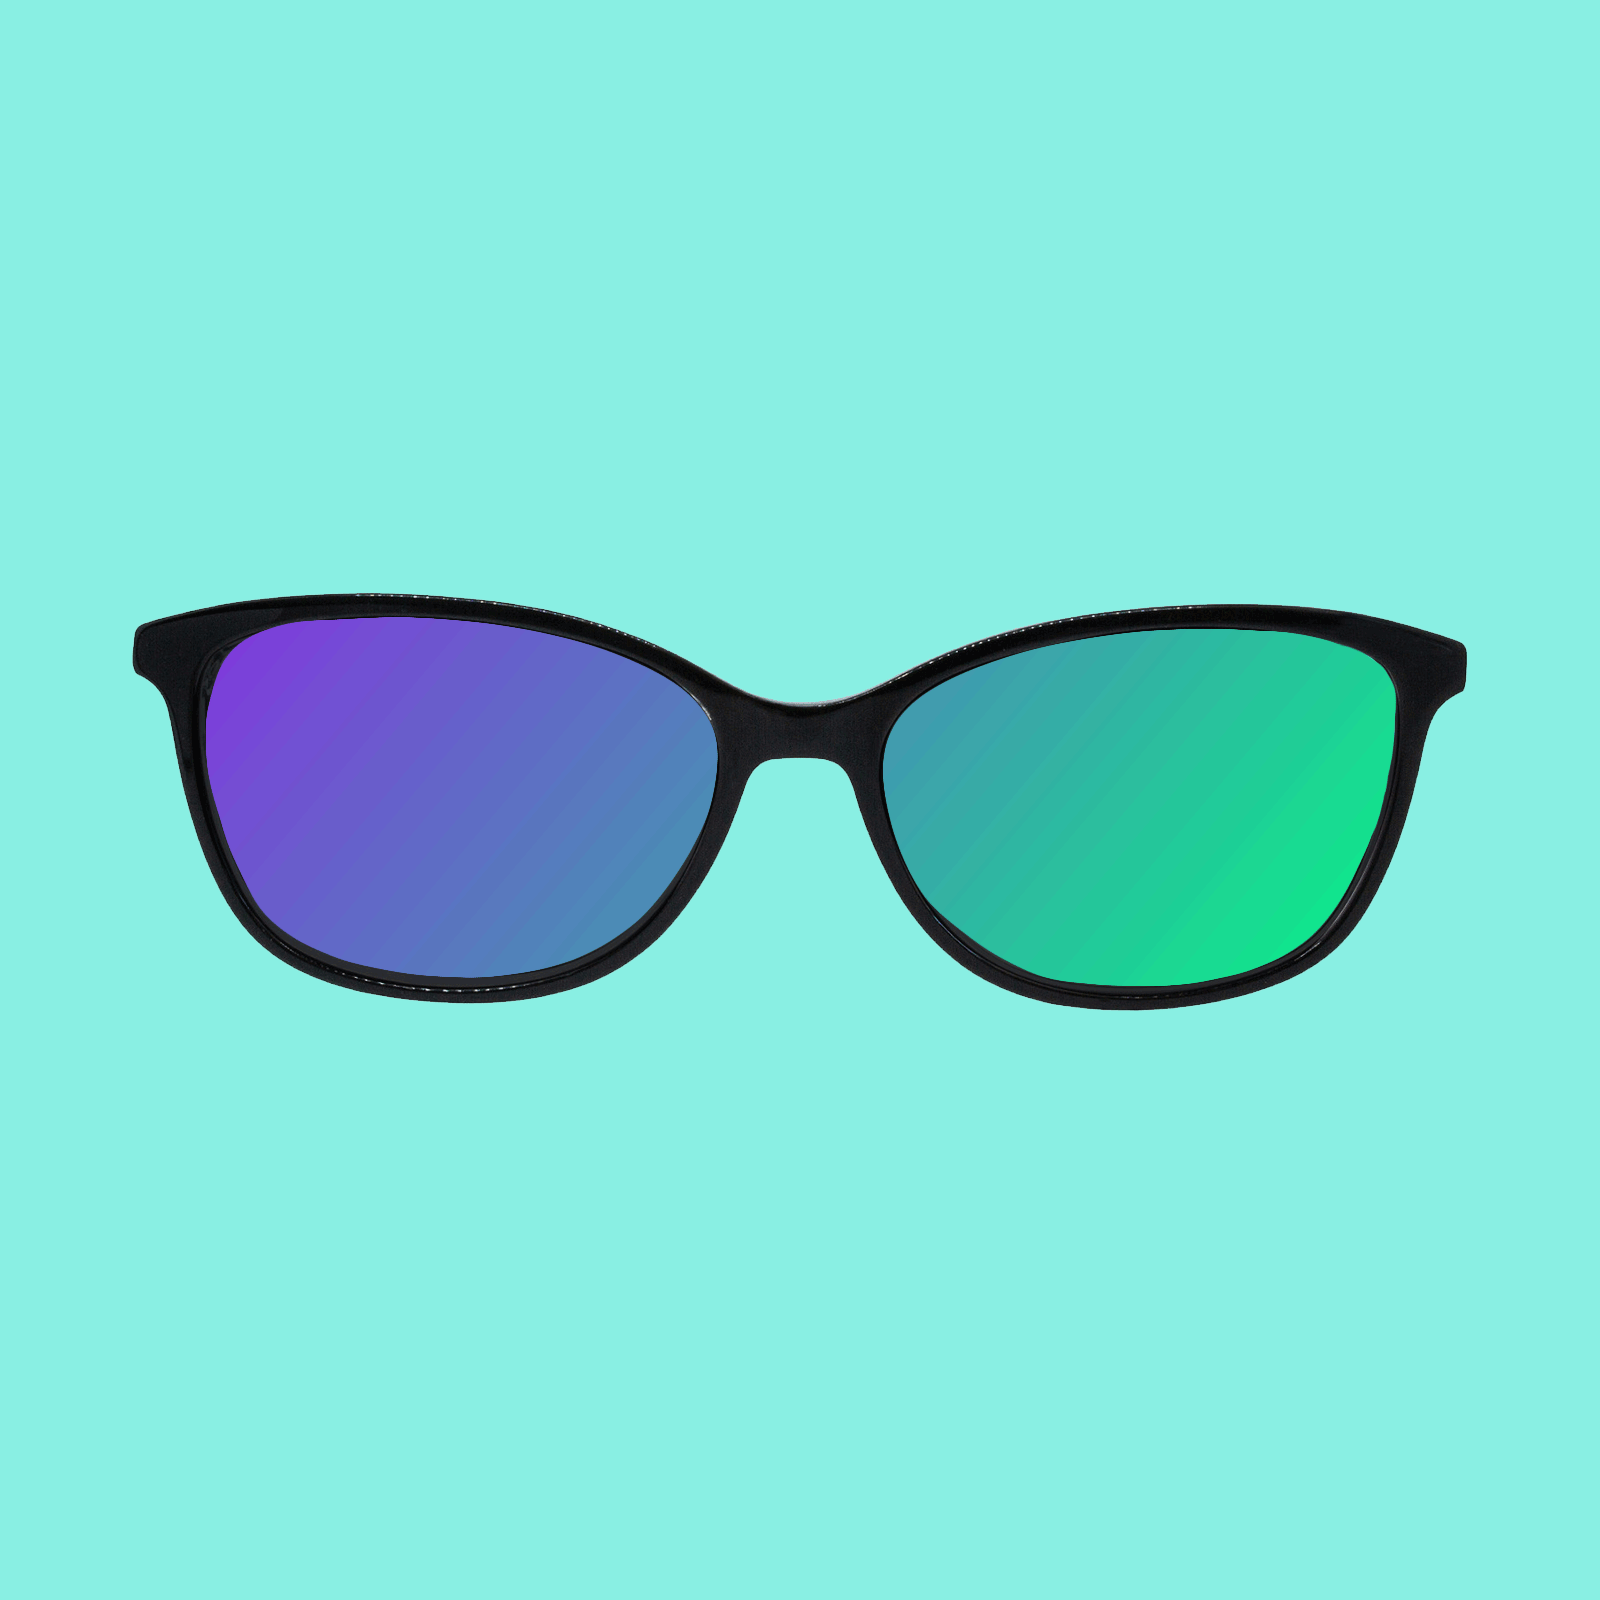 Animation of sunglasses with light passing through them